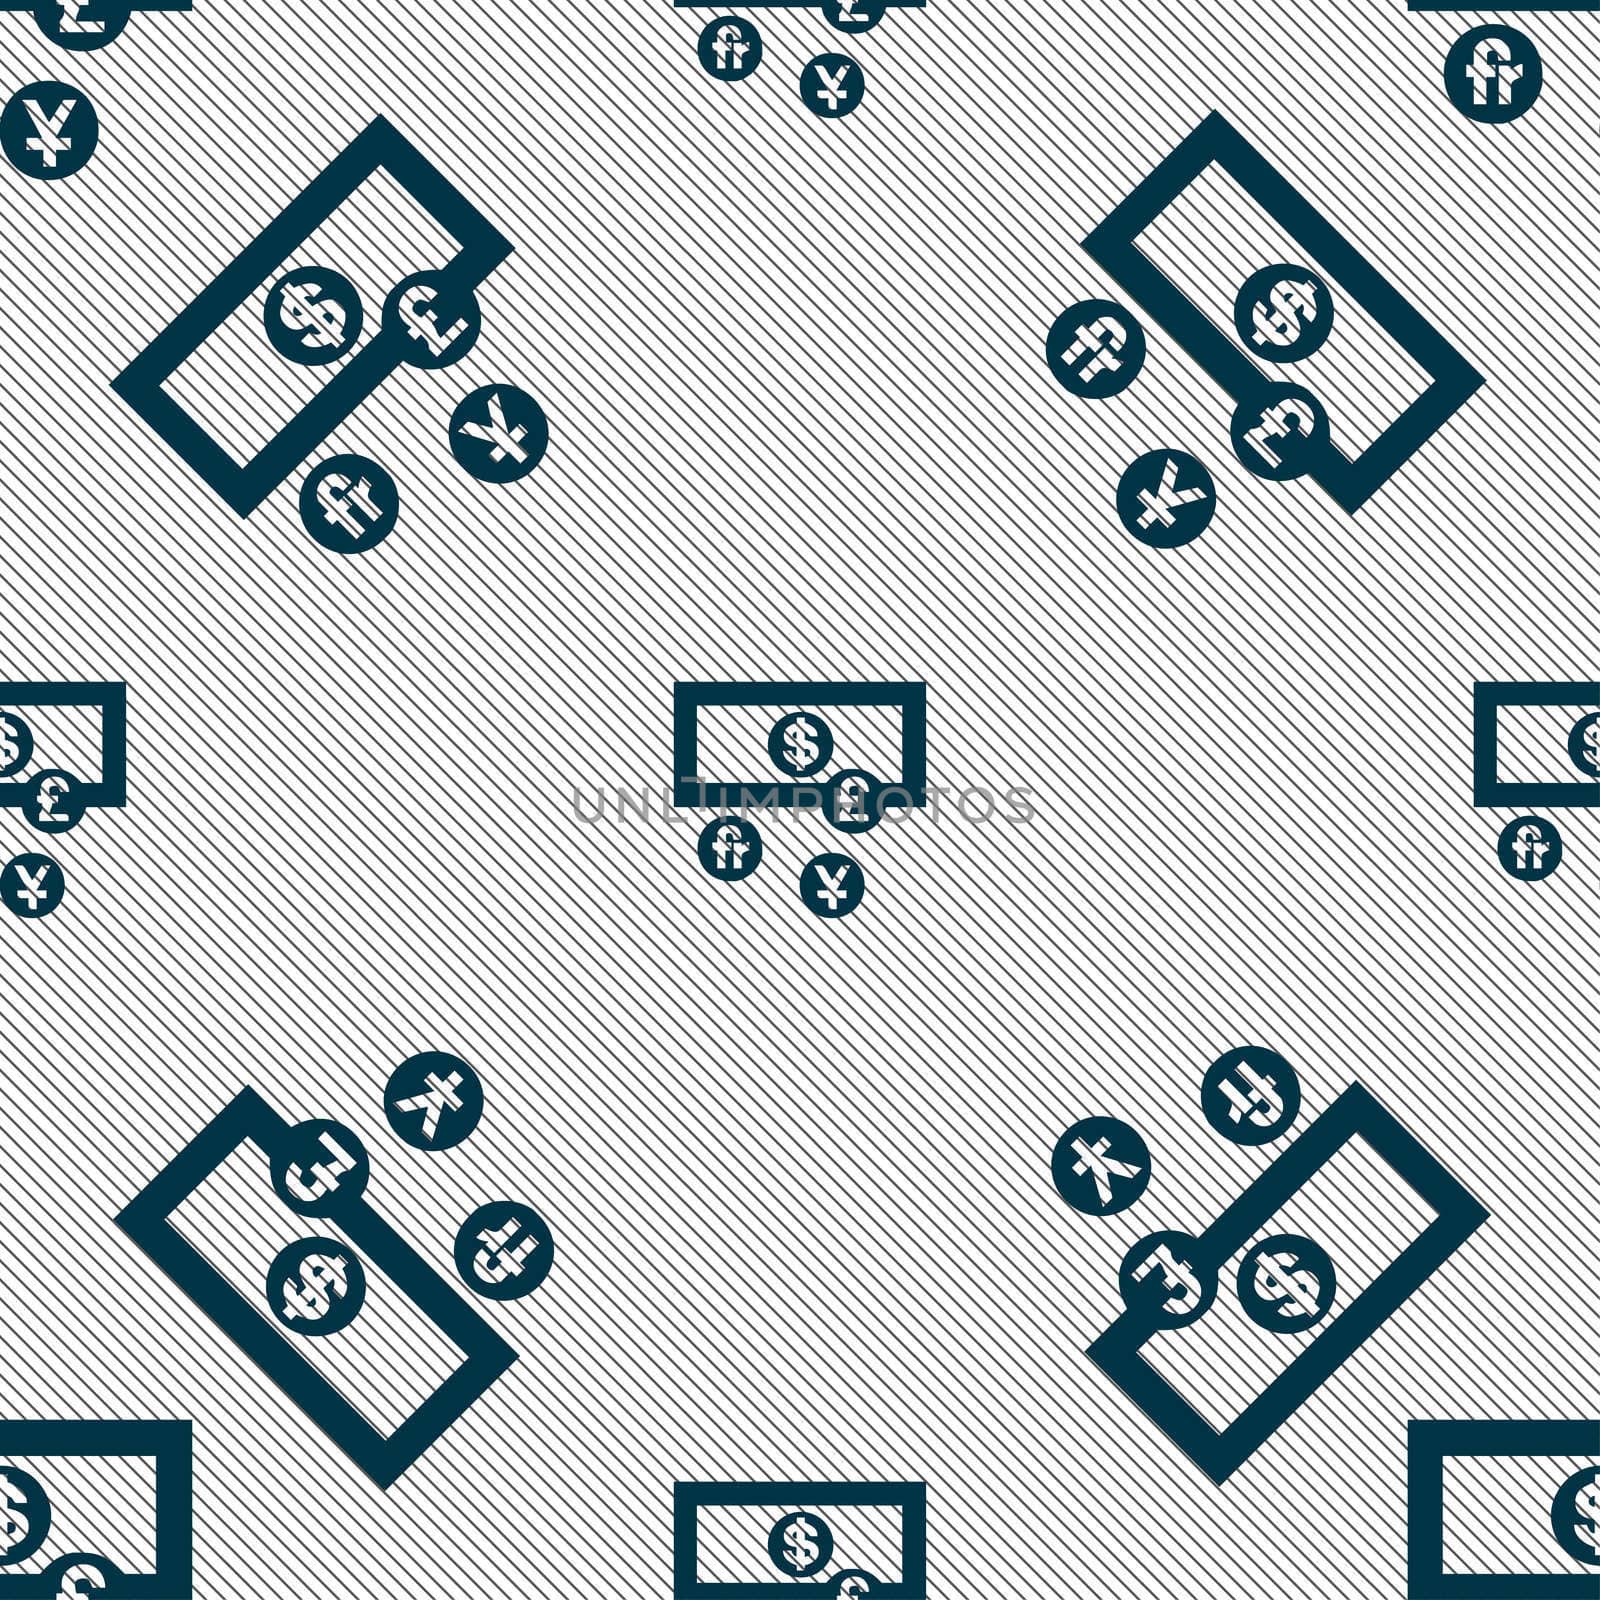 currencies of the world icon sign. Seamless pattern with geometric texture. illustration